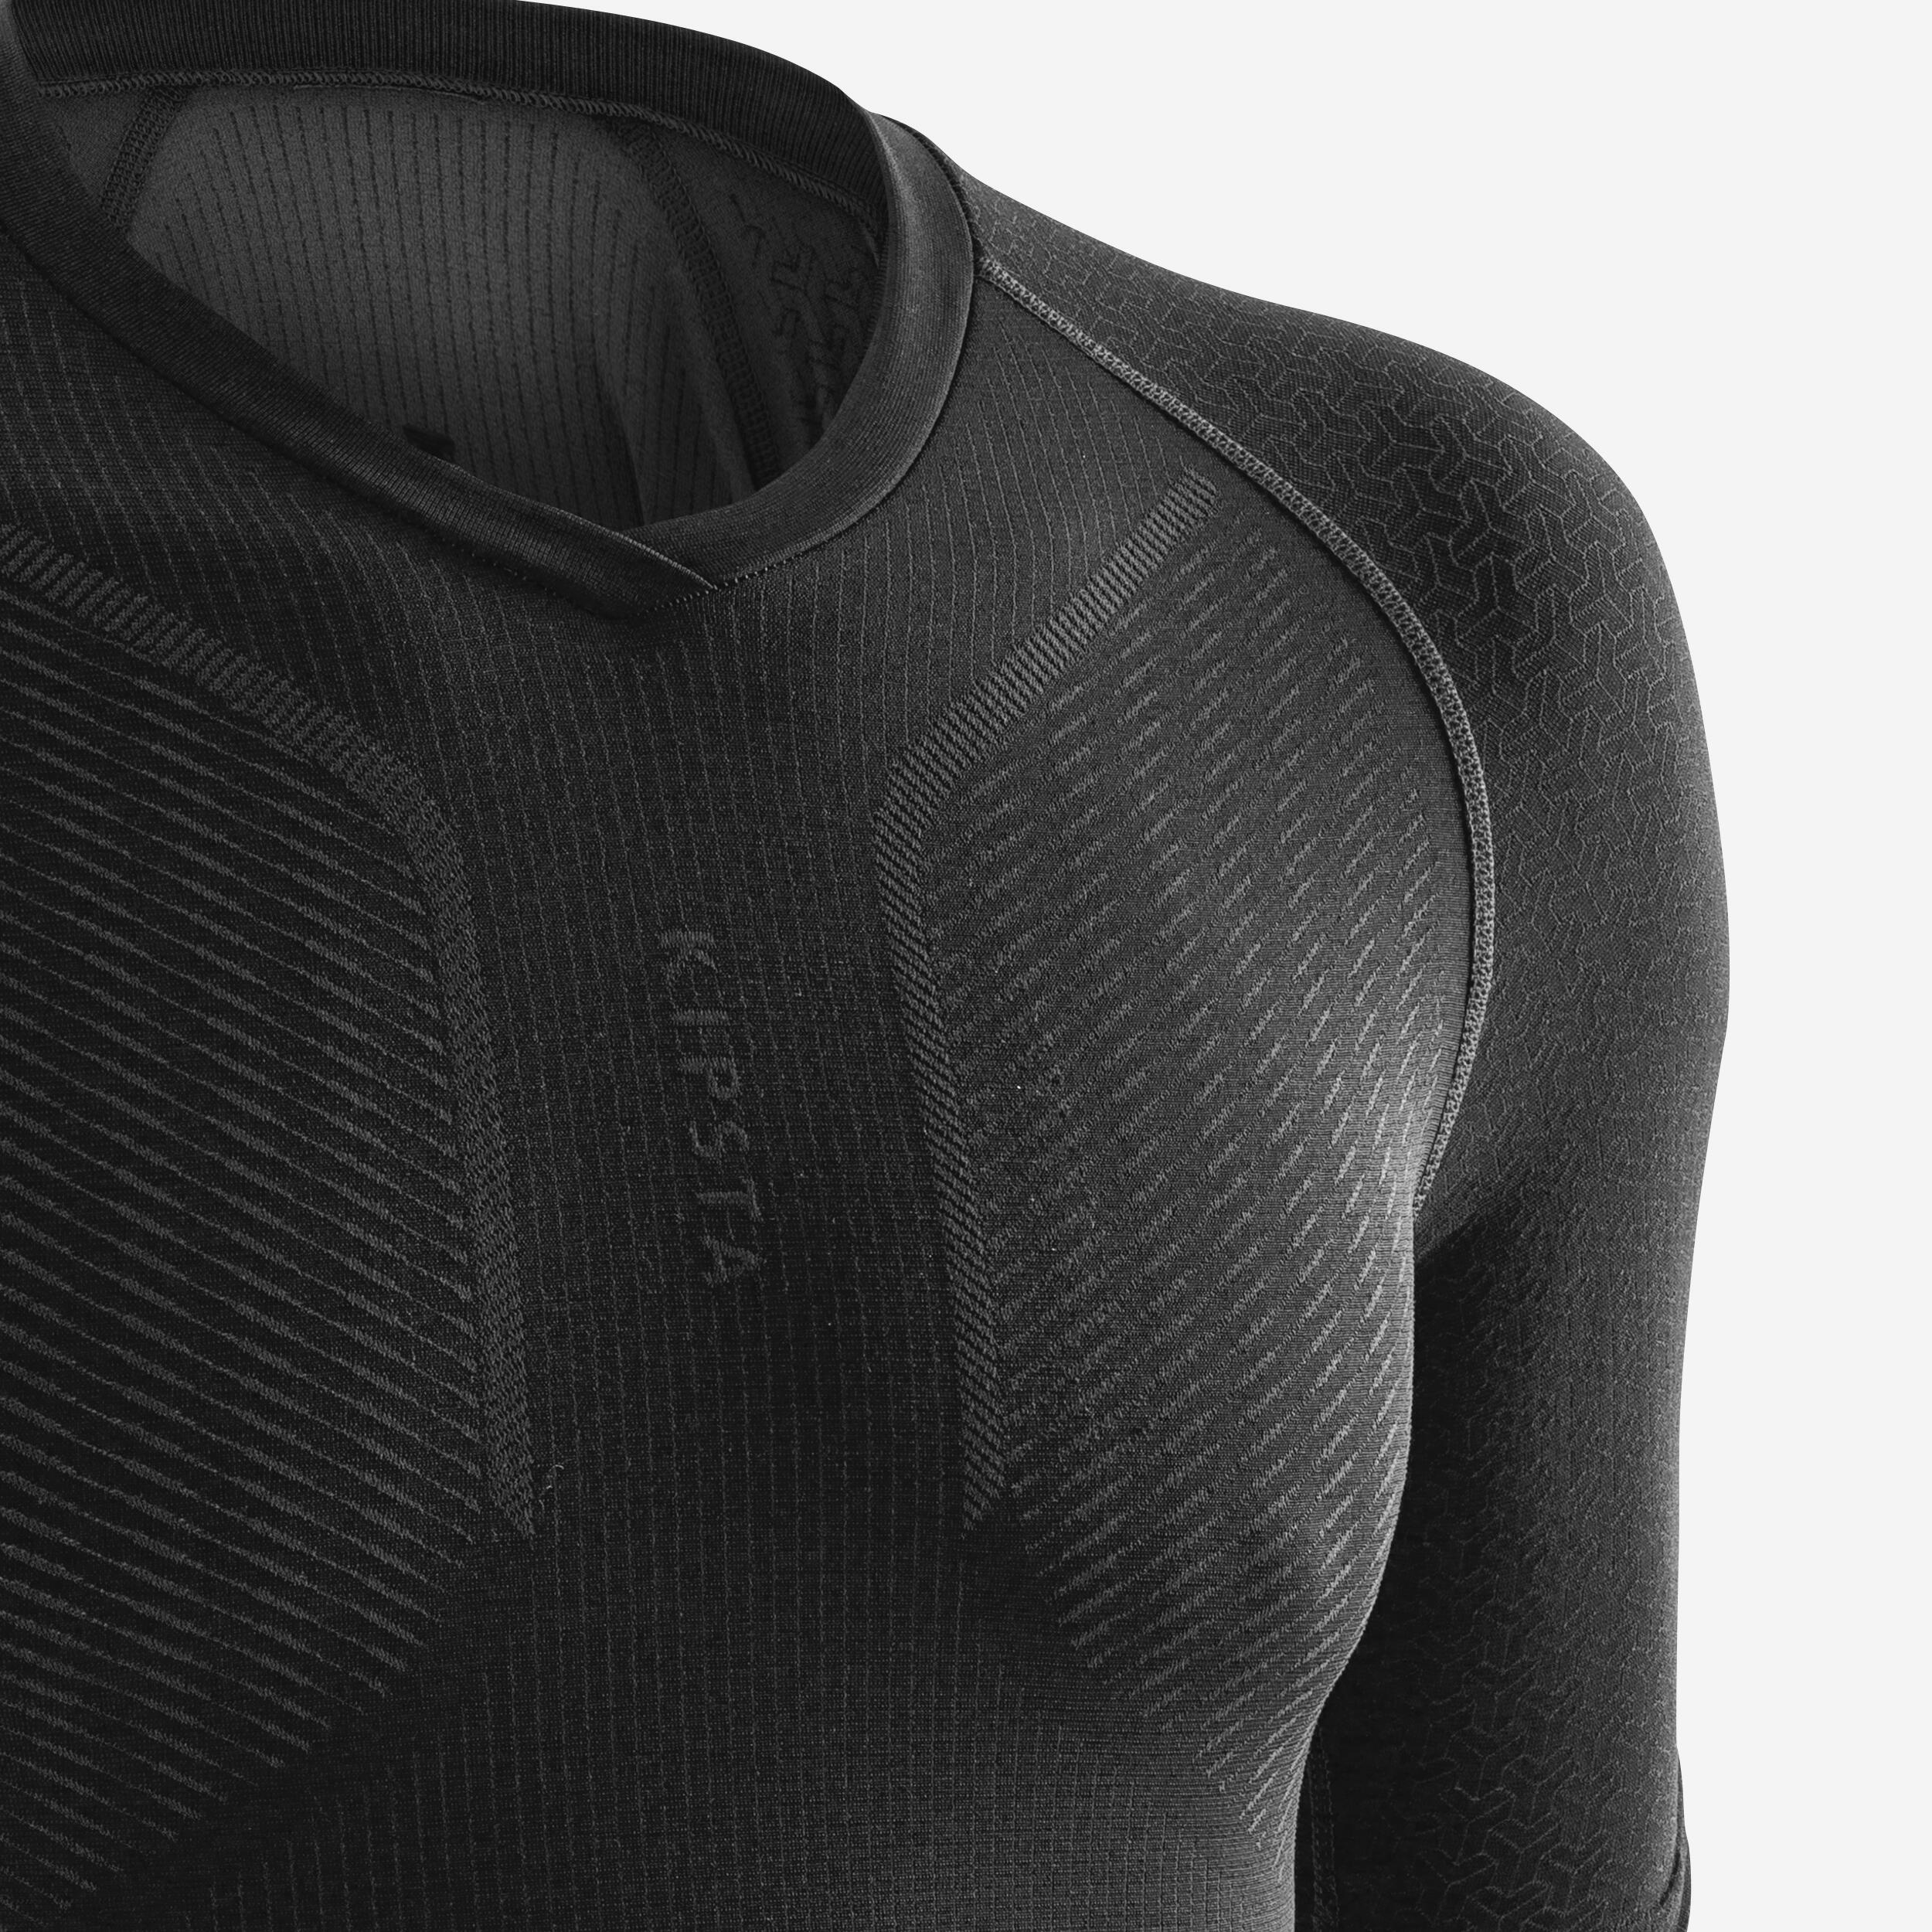 Adult Short-Sleeved Thermal Base Layer Top Keepdry 500 - Black 4/5